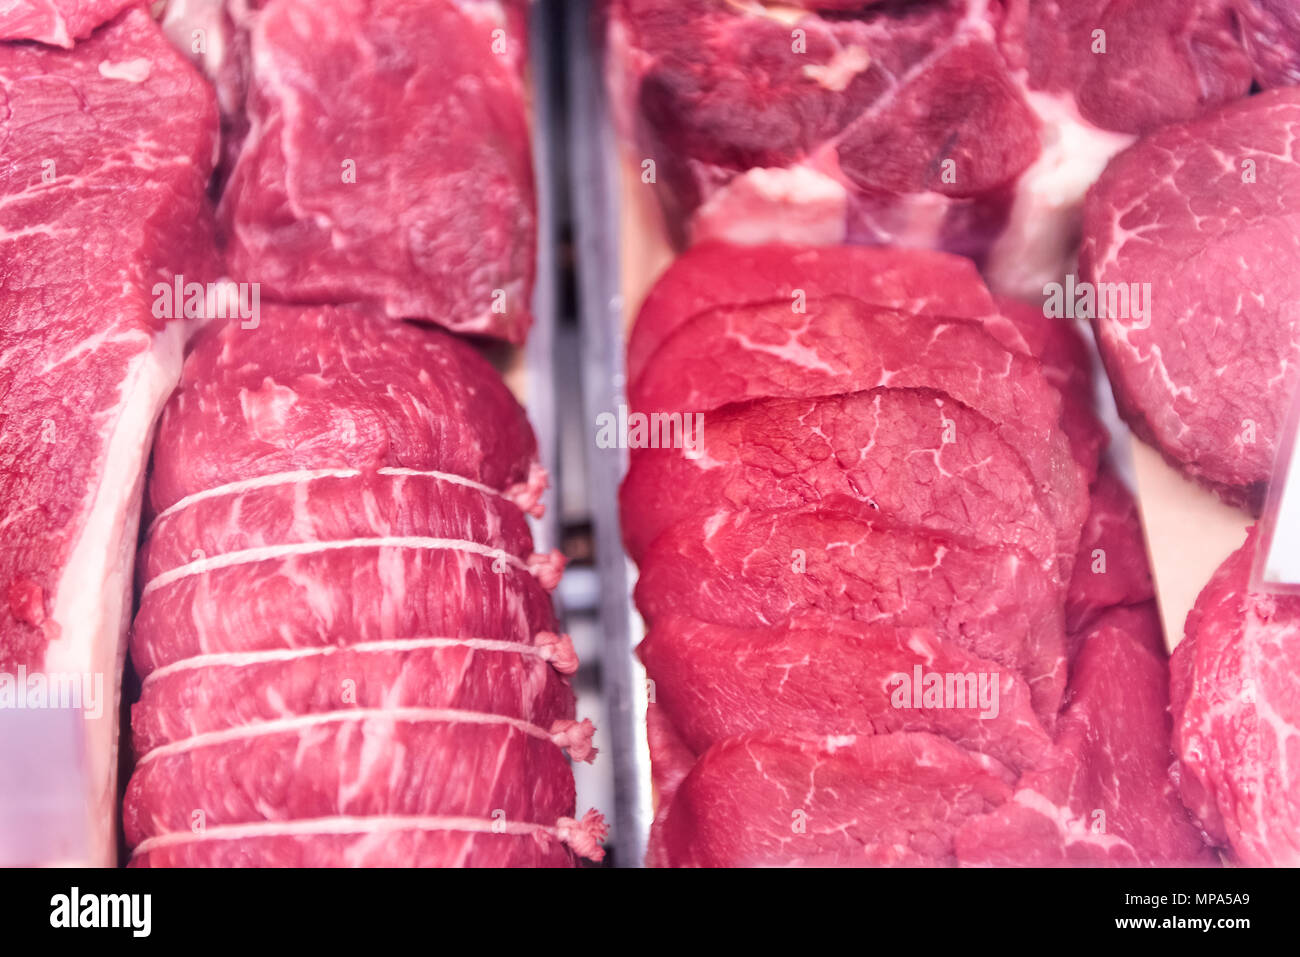 Dark red raw fatty meat boneless with fat beef steaks and roast, in store display for sale closeup Stock Photo